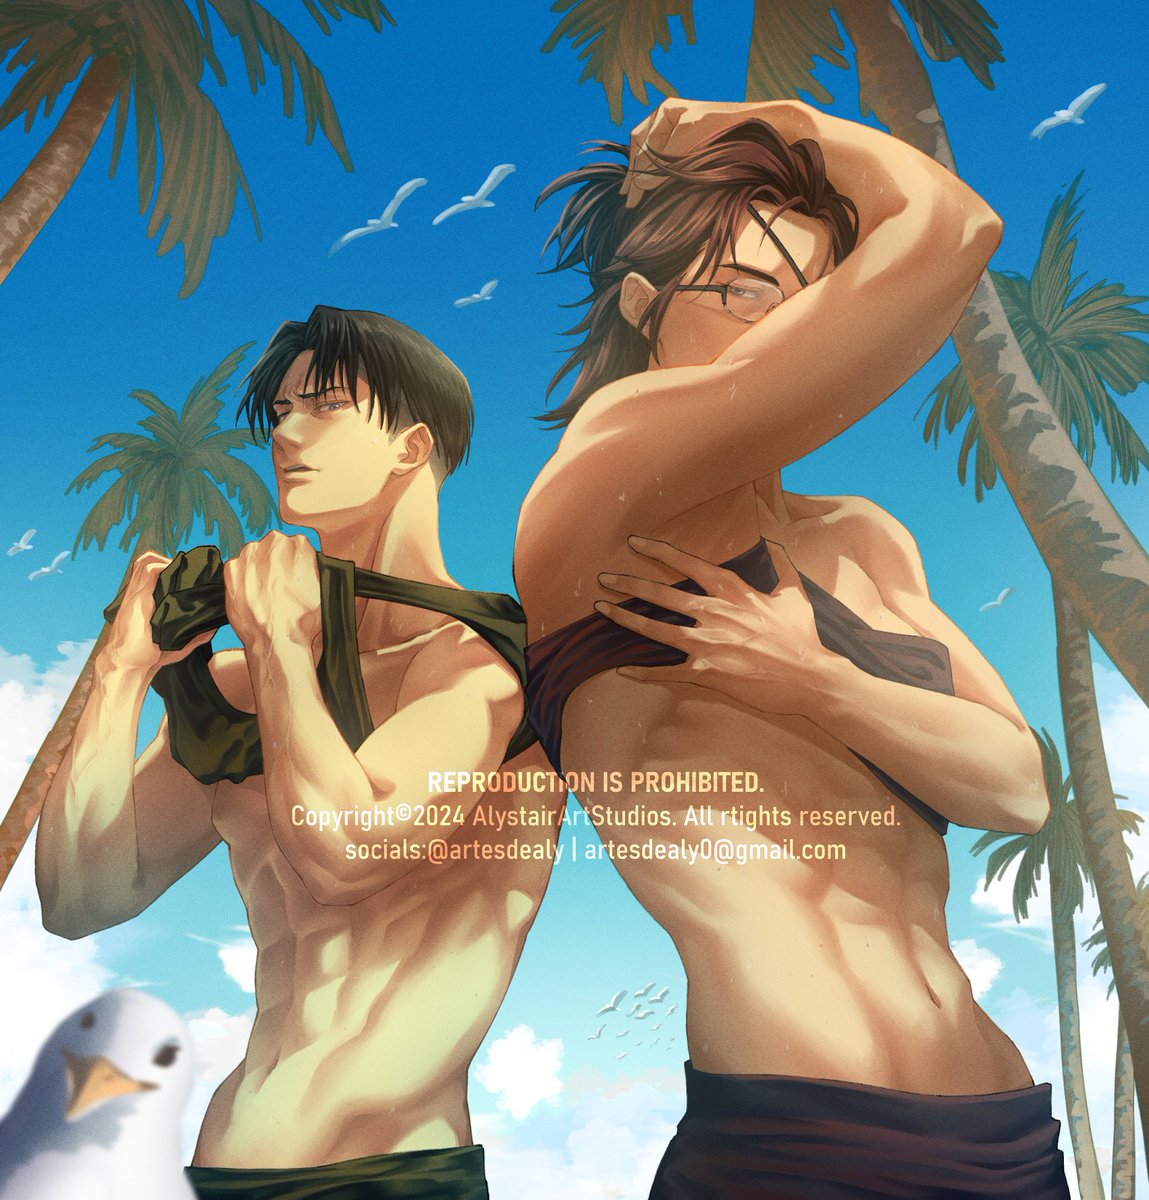 Levihan Hot-dry season
-
It took me quite a while to finish this due to the extreme heat in my country. I hope you all will enjoy the hot and juicy meal.

#AttackOnTitan #ShingekiNoKyojin #aot #snk #Levihan #hanjizoe #leviackerman